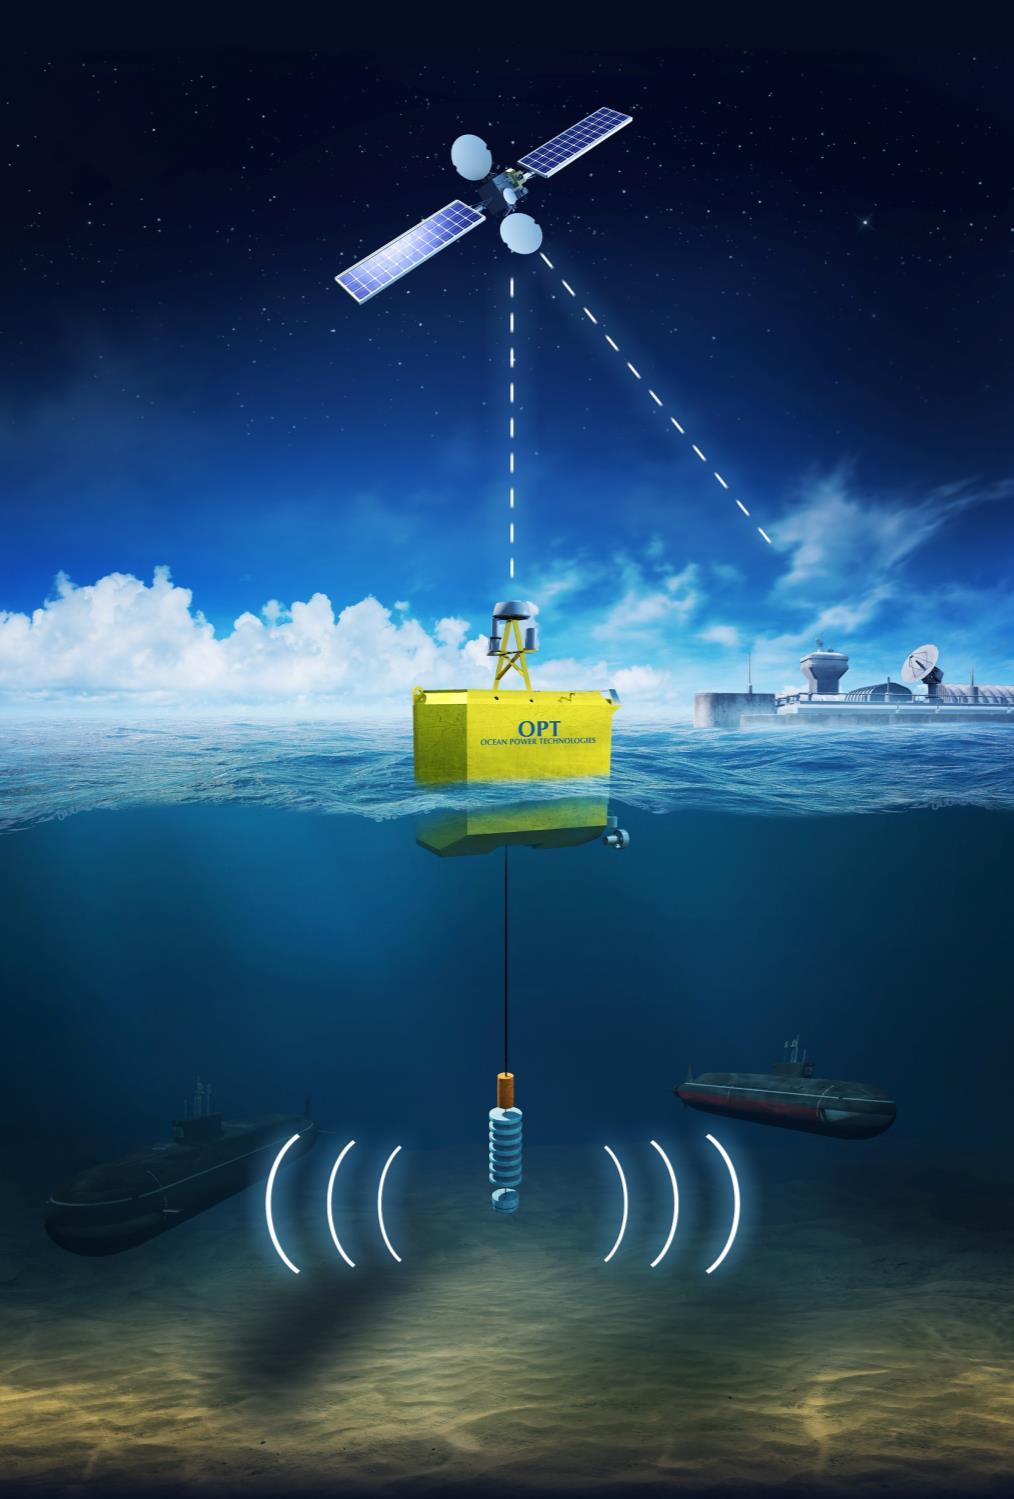 Anchorless PowerBuoy TM Inertia-based wave energy harvesting technology Hybrid energy sources for high availability Wave Diesel Battery Solar (optional) Hermetically sealed Anchorless Steerable